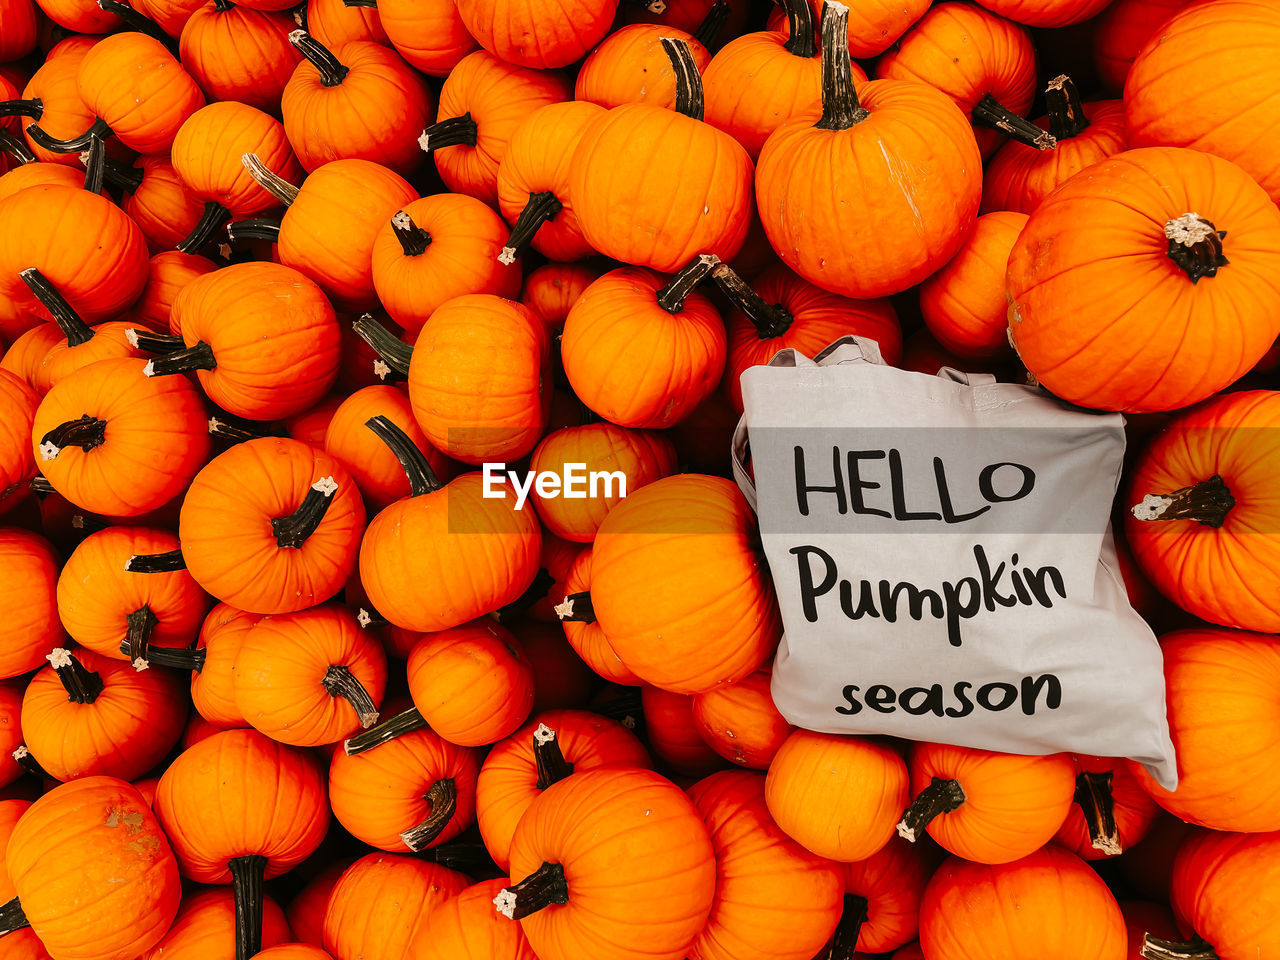 VARIOUS PUMPKINS FOR SALE AT MARKET STALL